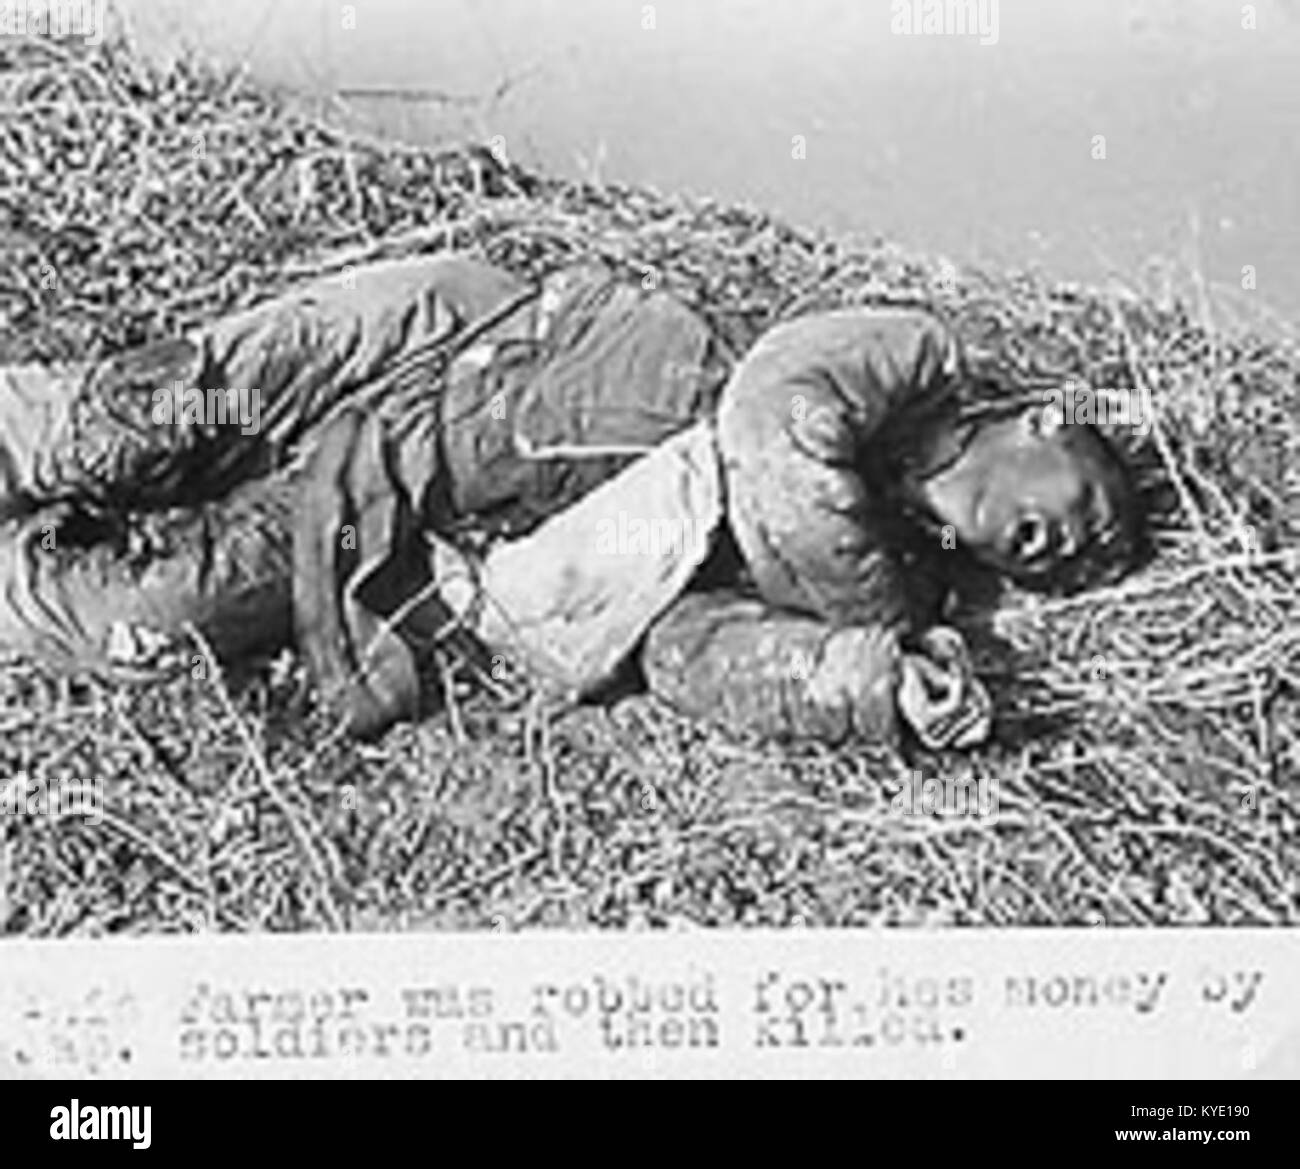 This farmer was robbed for his money by Jap soldiers and then killed, Nanjing Massacre Stock Photo